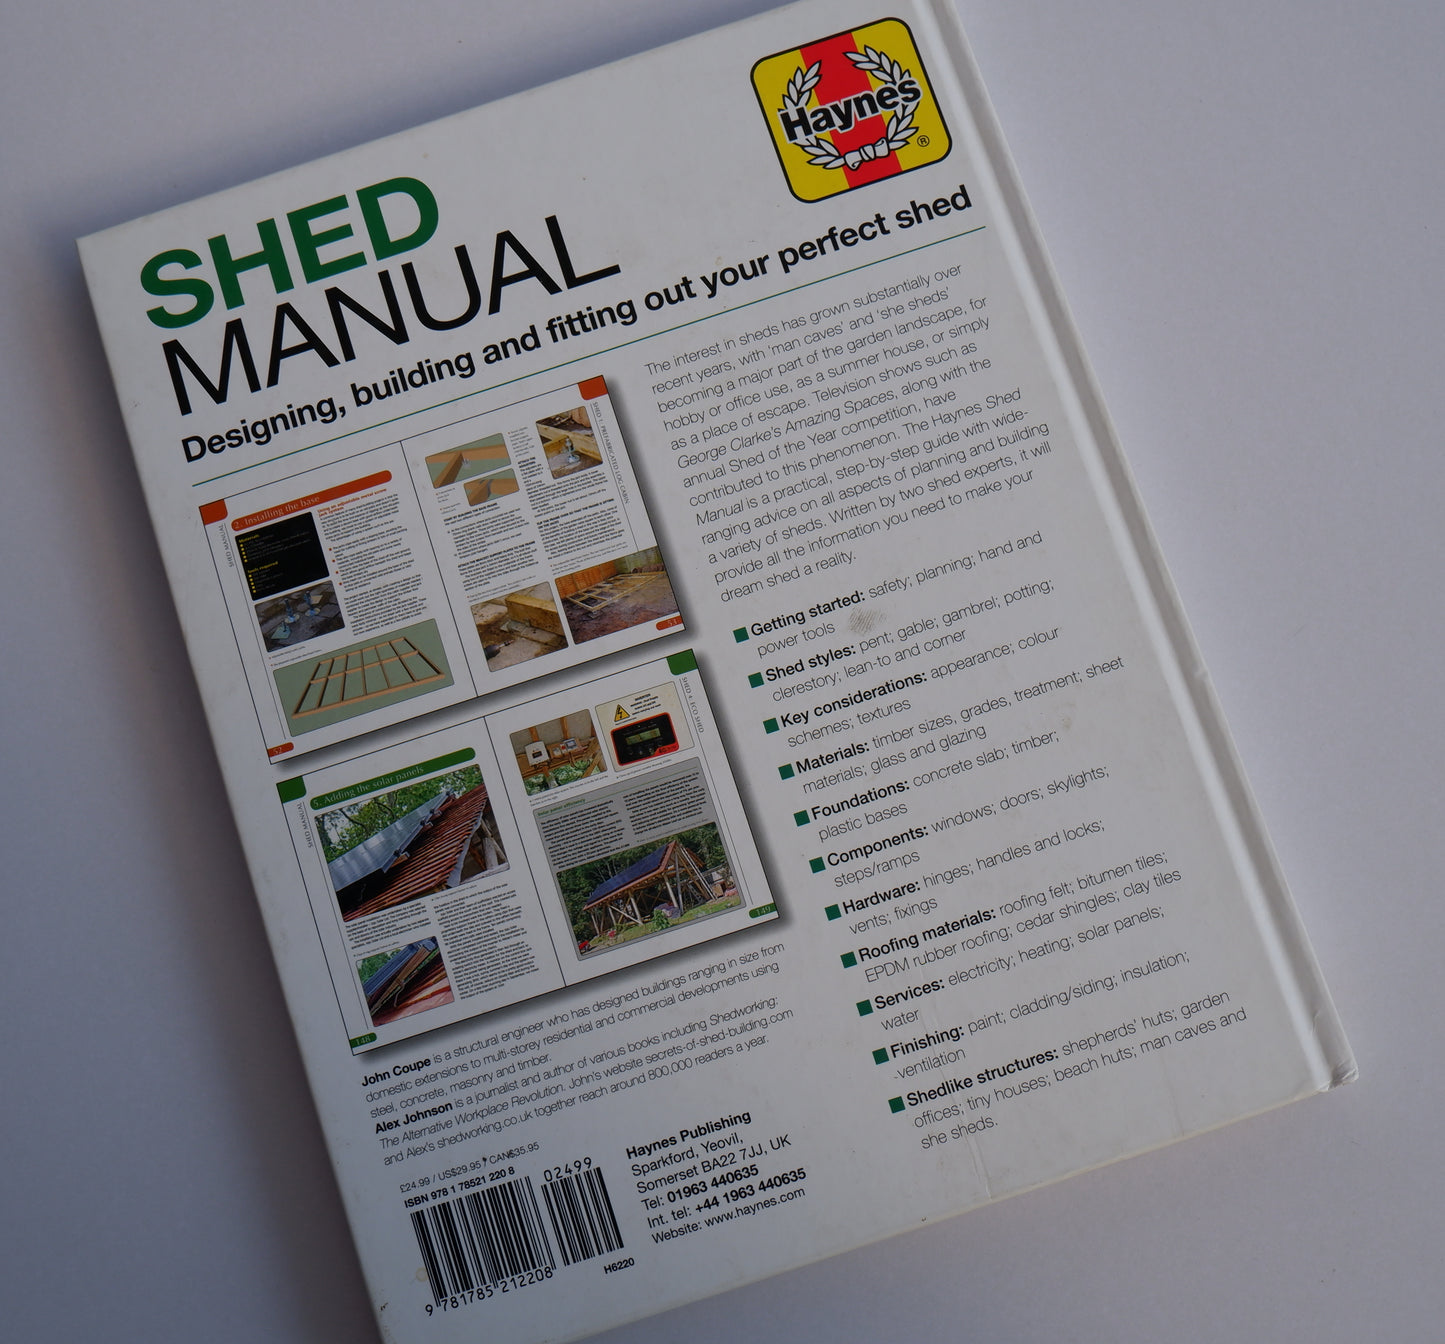 Haynes: Shed Manual : Designing, building and fitting out your perfect shed